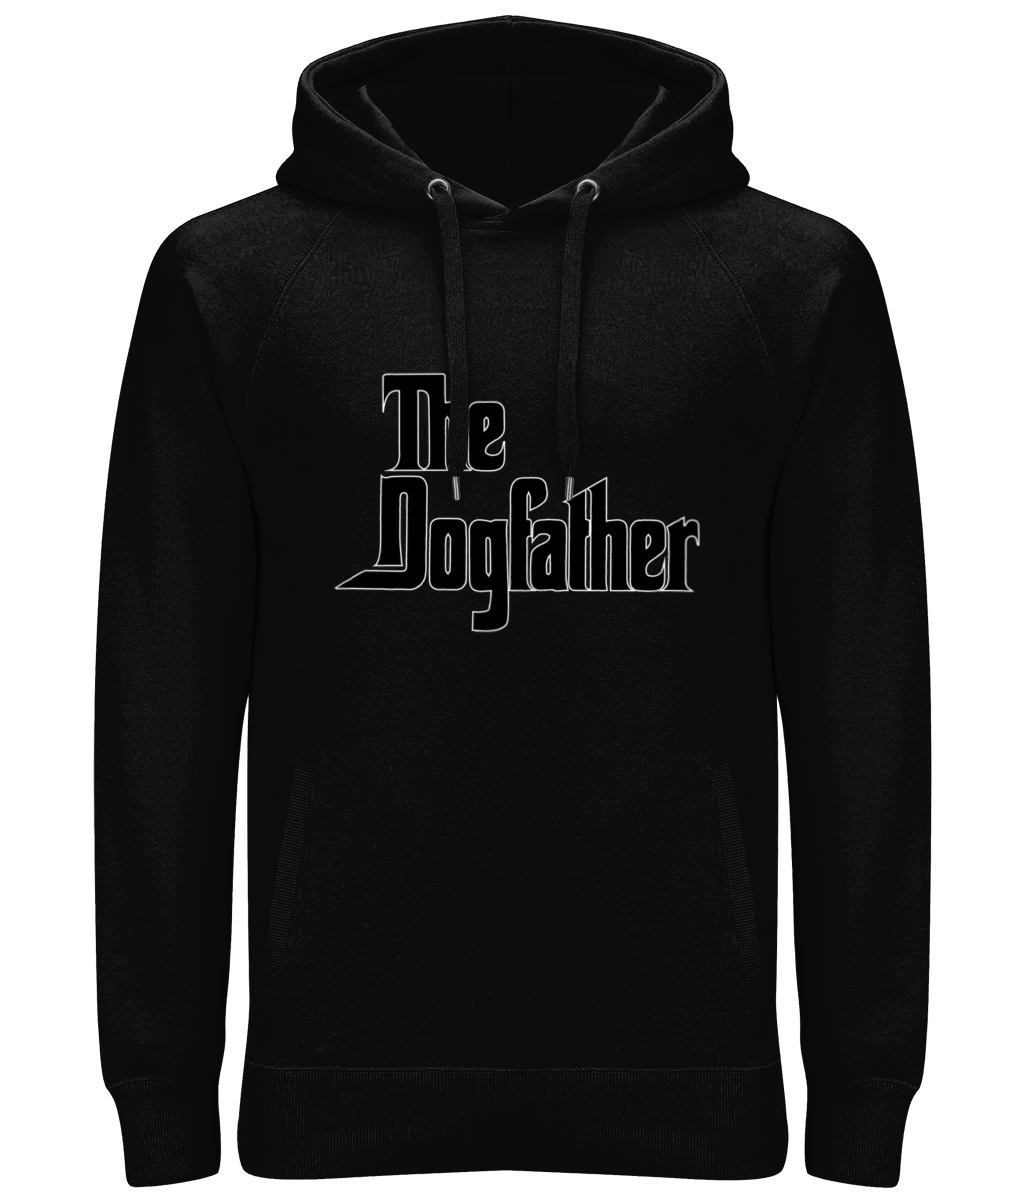 THE DOGFATHER Hoodie